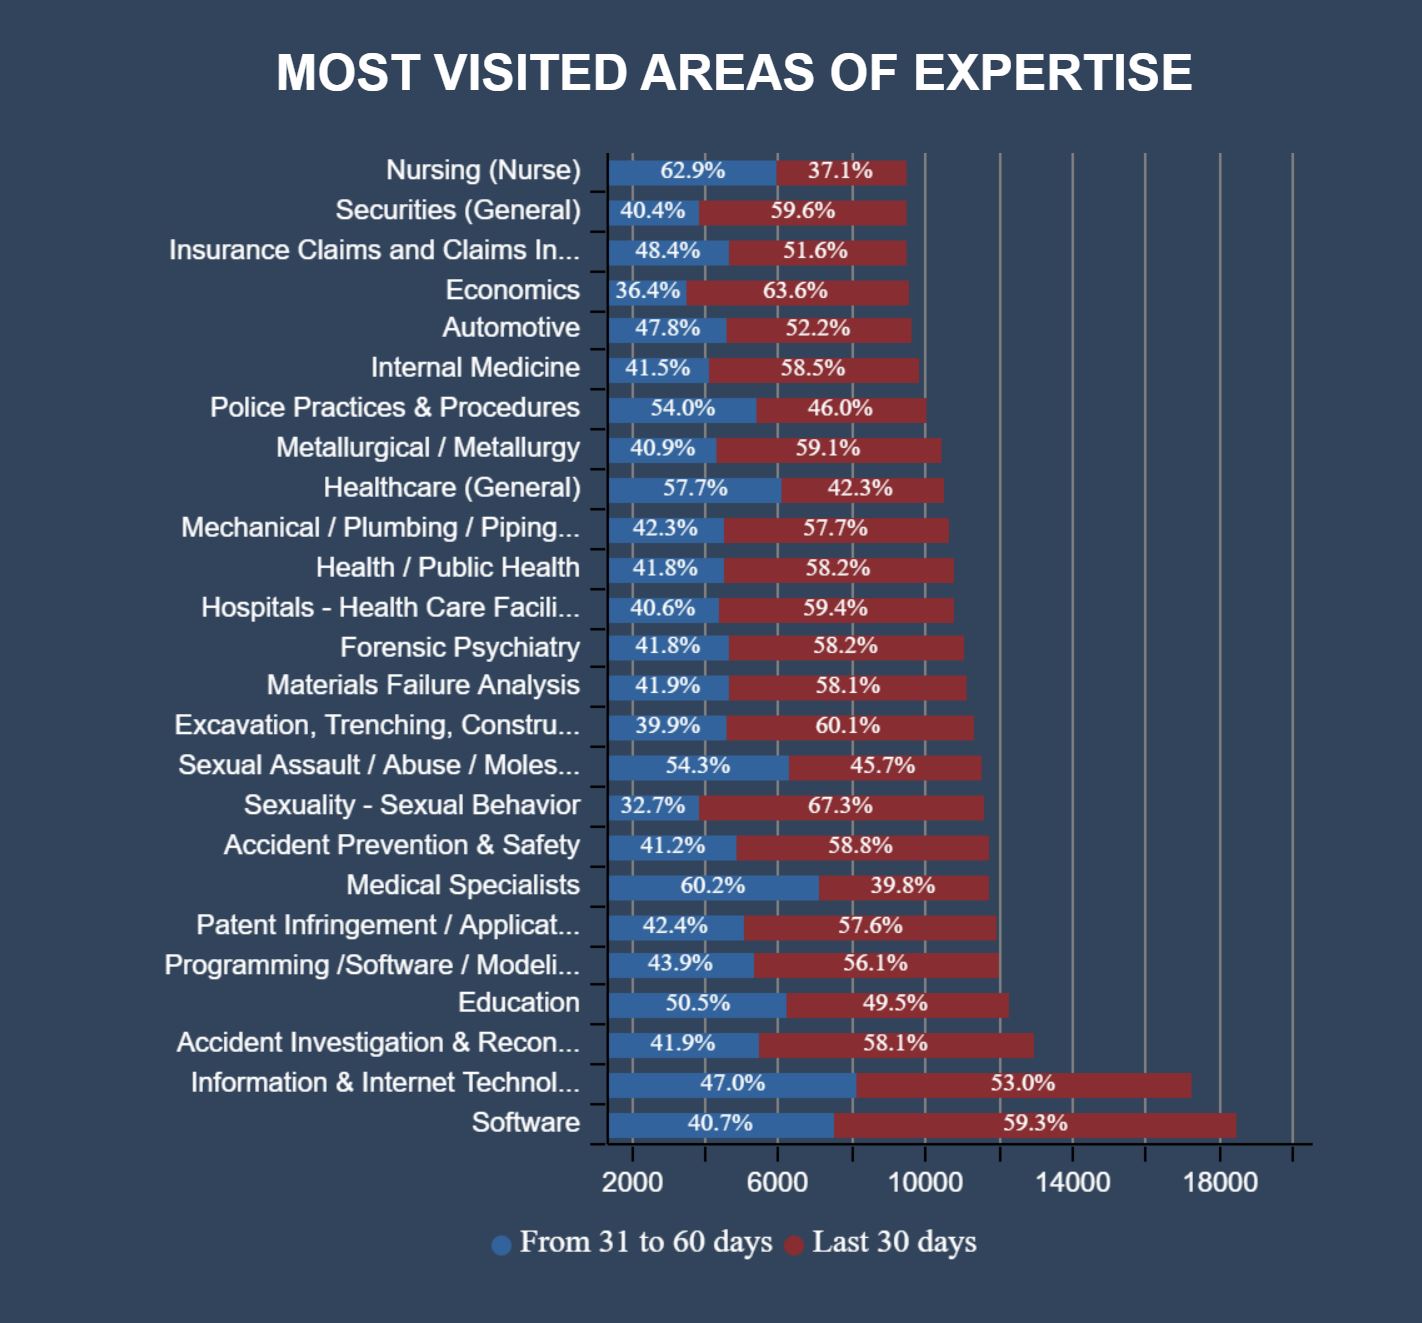 law firms view areas of expertise